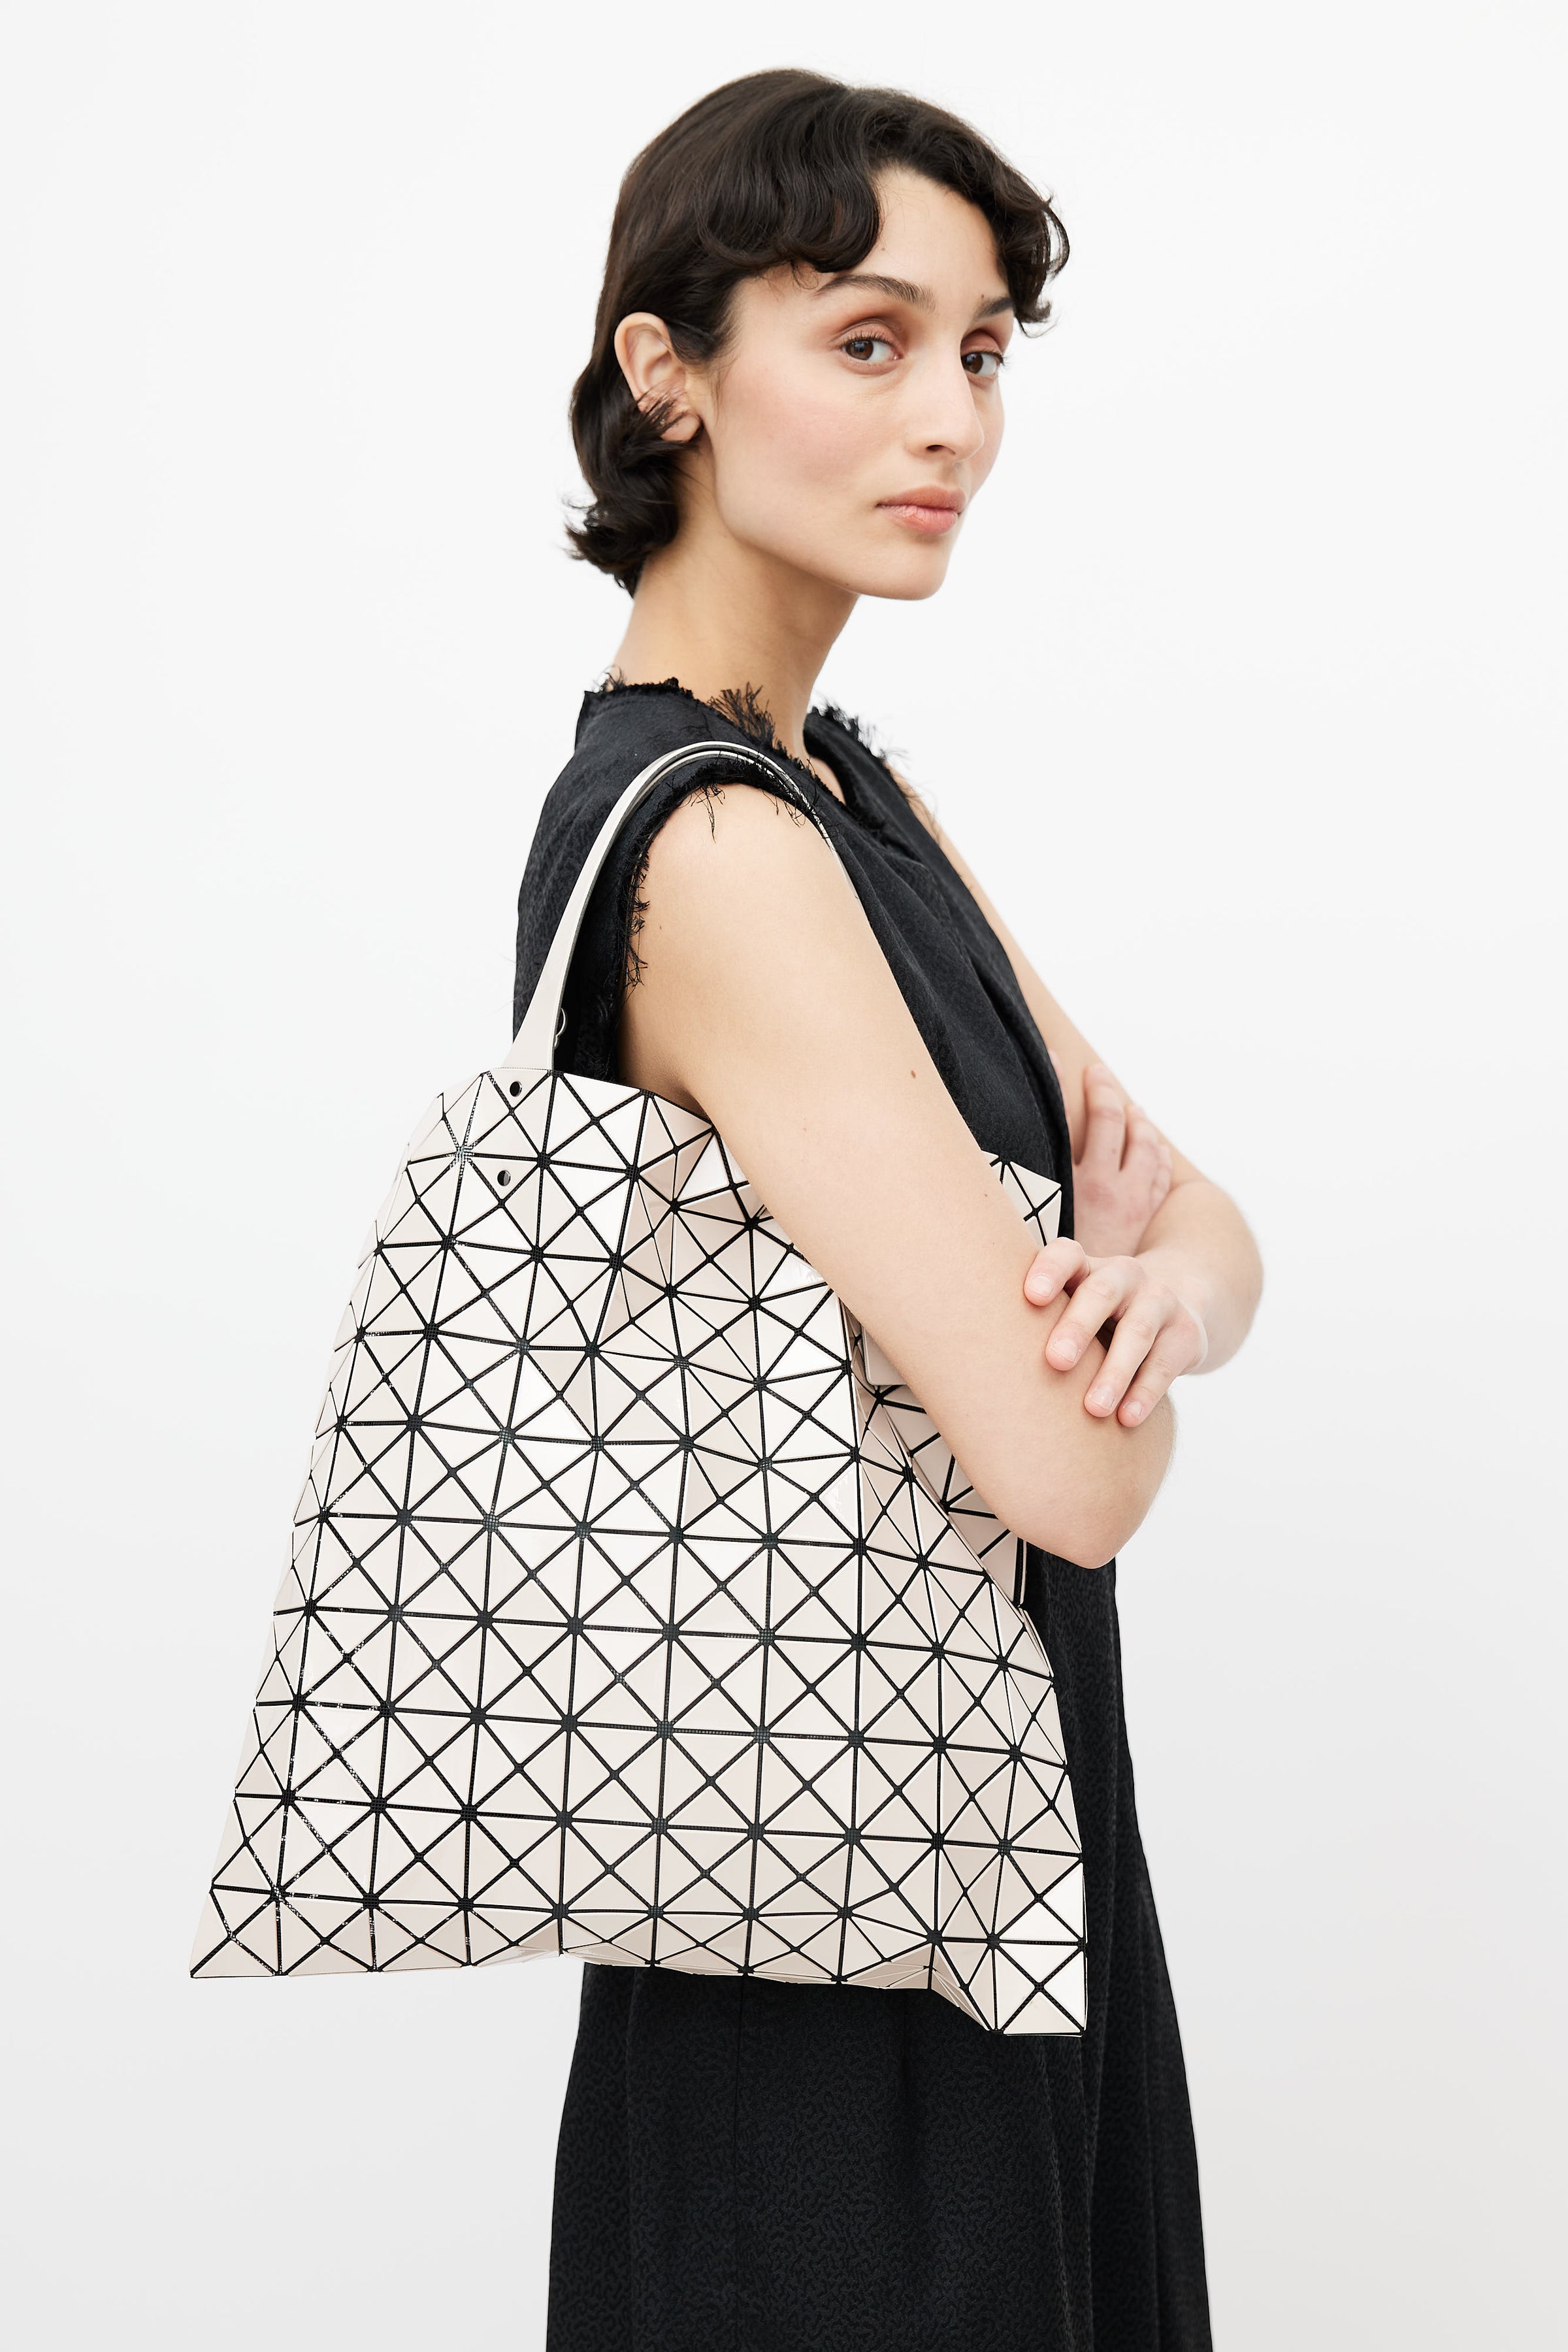 Lucent 6x6 Tote Bag